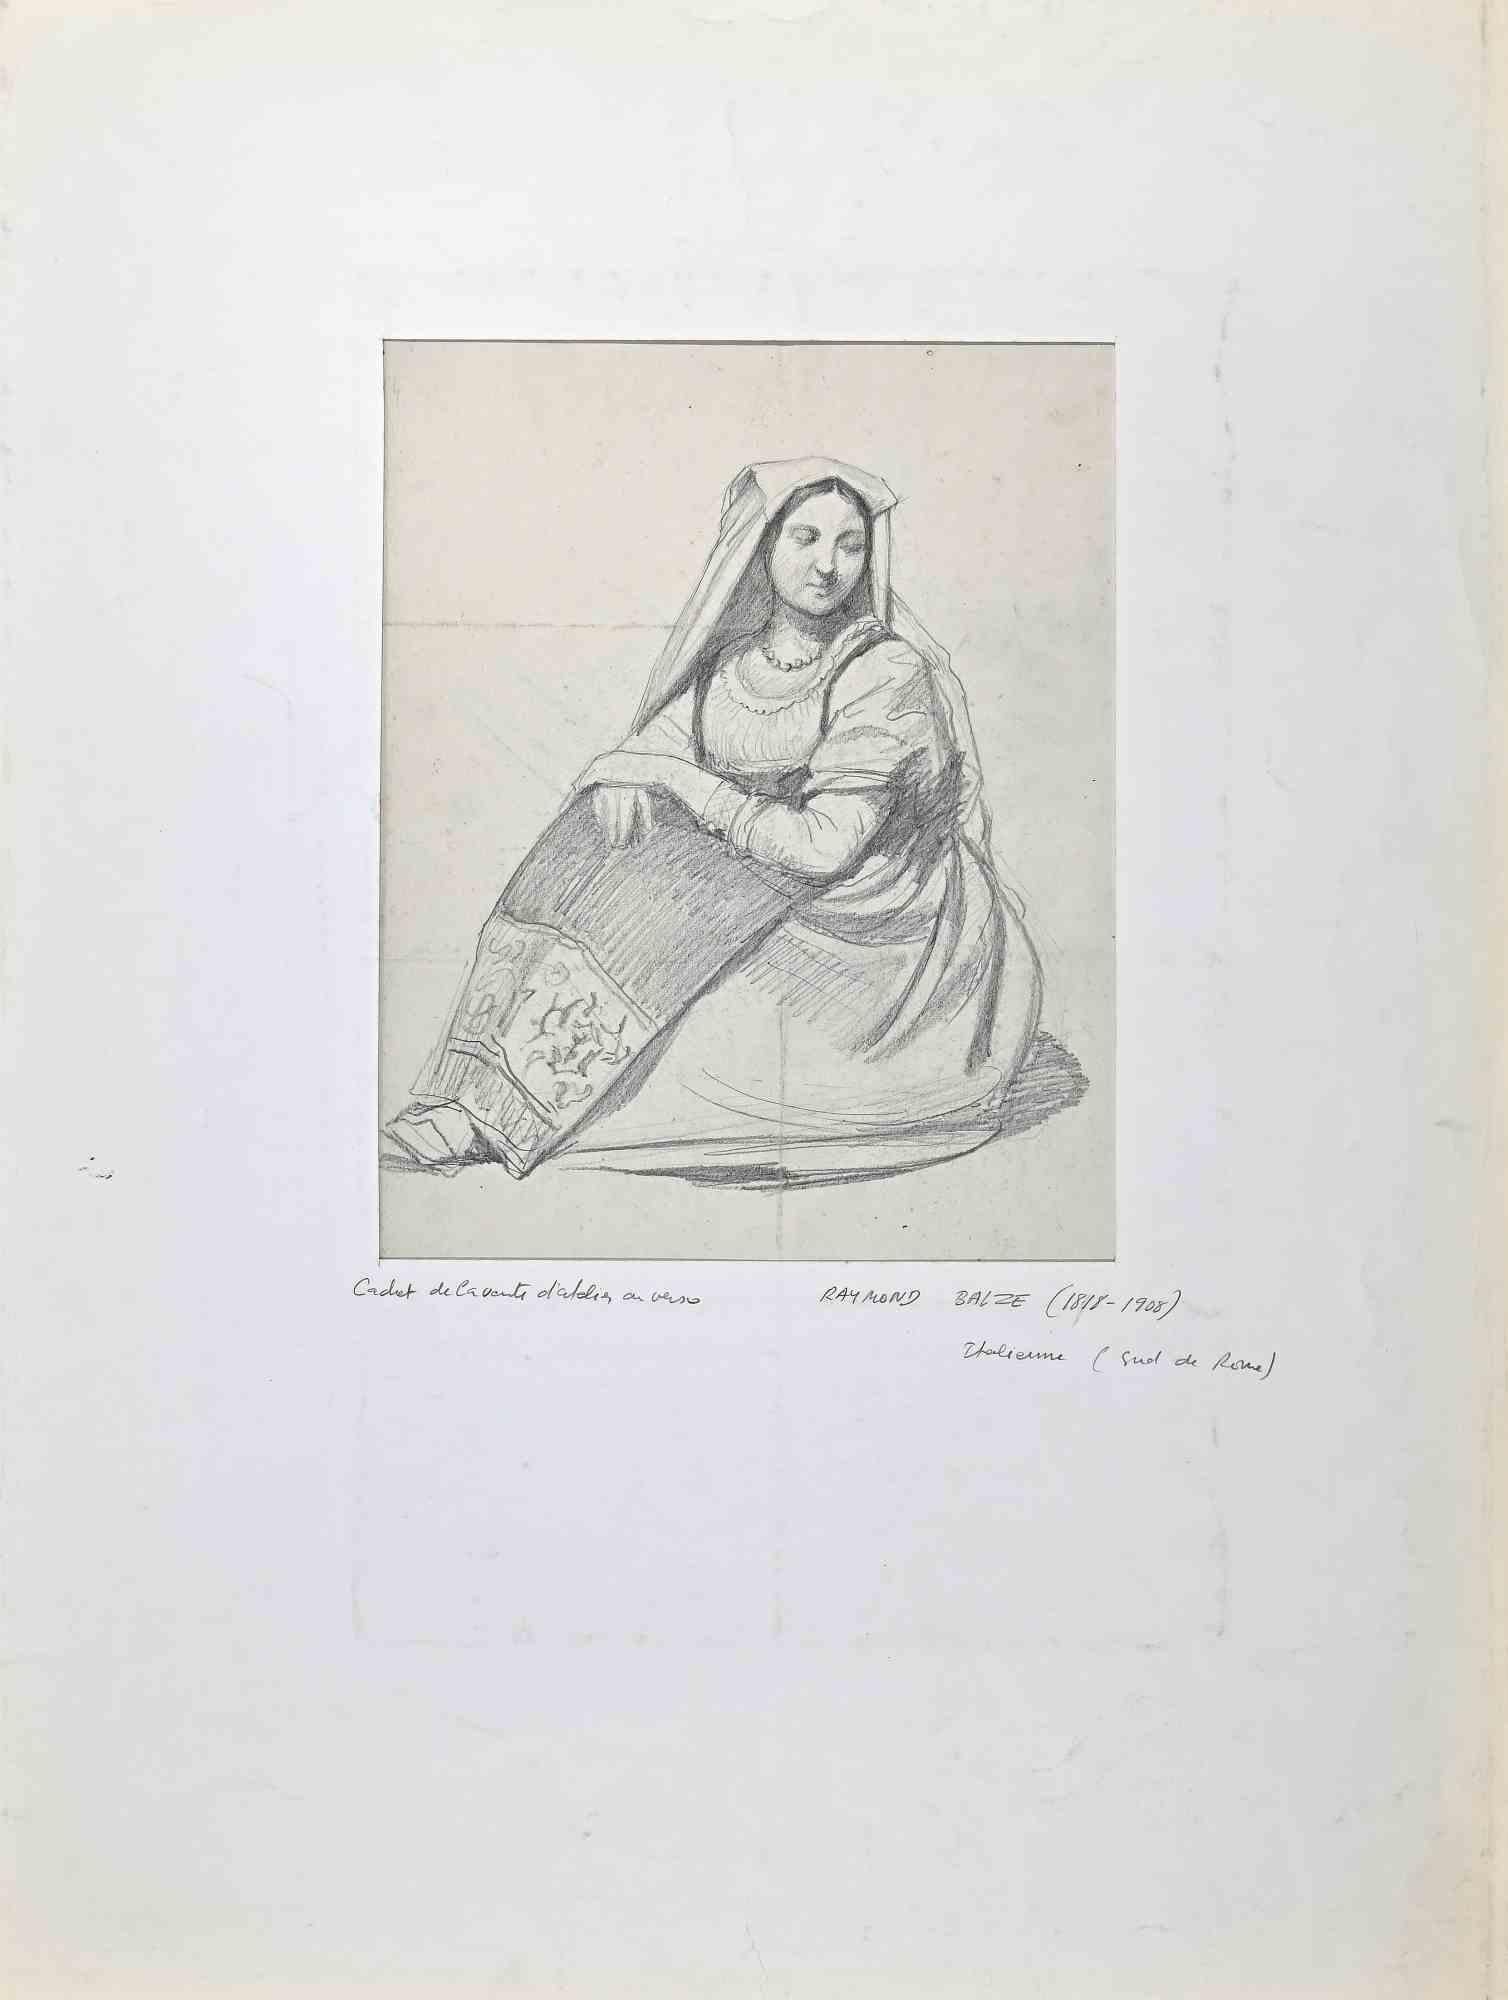 Woman is an Original Pencil Drawing realized by Raymond Balze (1818-1909).

Good Condition on a yellowed paper included a white cardboard passpartout (67x51 cm).

No signature.

Raymond Balze (4 May 1818 – 26 February 1909) was a French painter and